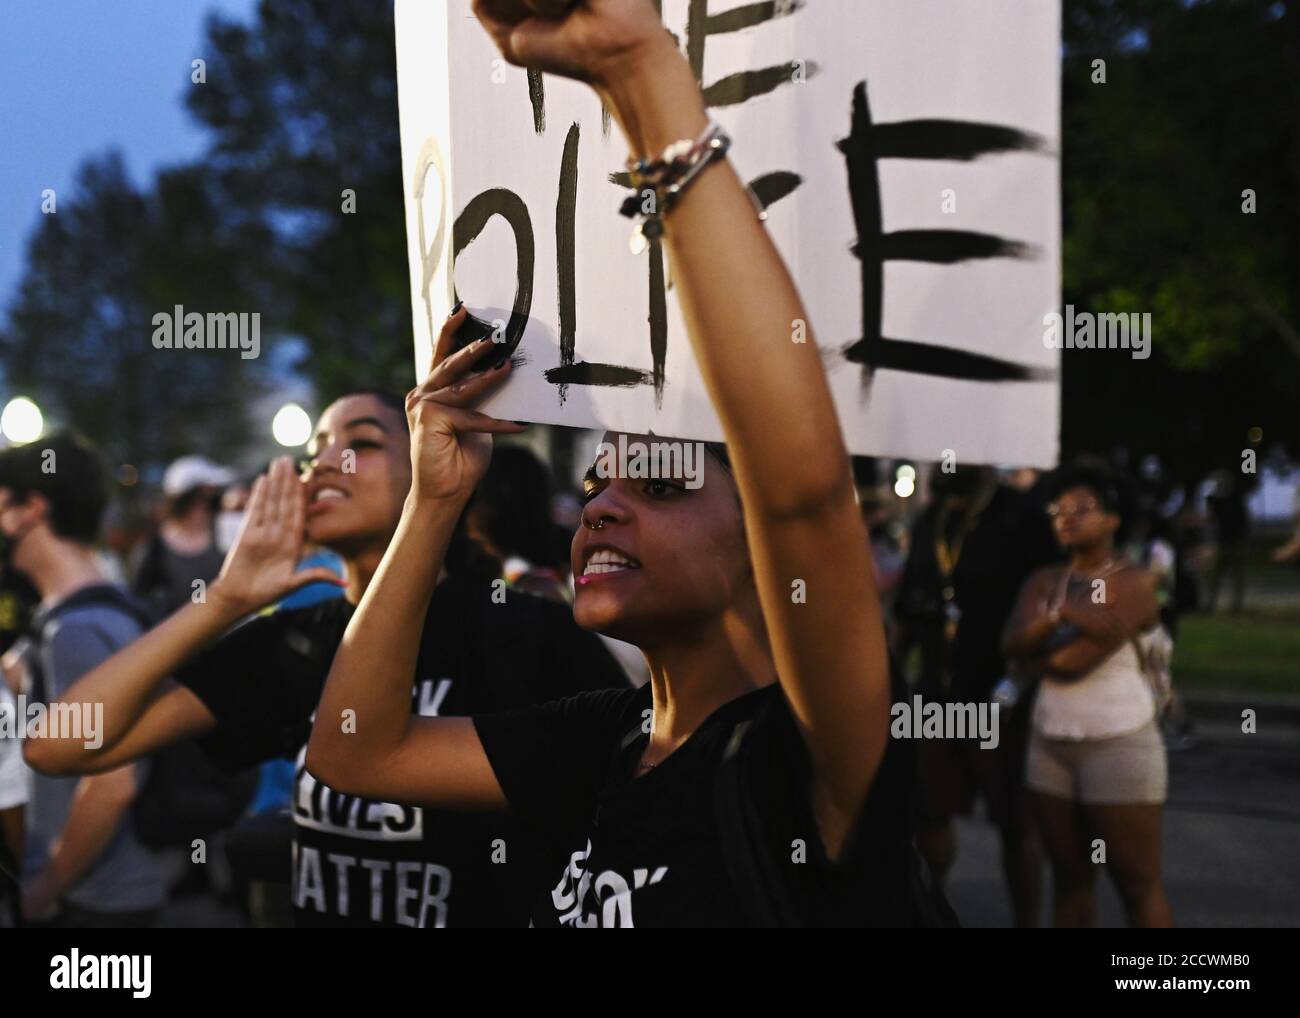 People yell at a line of police officers during a protest outside the Kenosha County Courthouse after a Black man, identified as Jacob Blake, was shot several times by police last night  in Kenosha, Wisconsin, U.S. August 24, 2020. REUTERS/Stephen Maturen Stock Photo